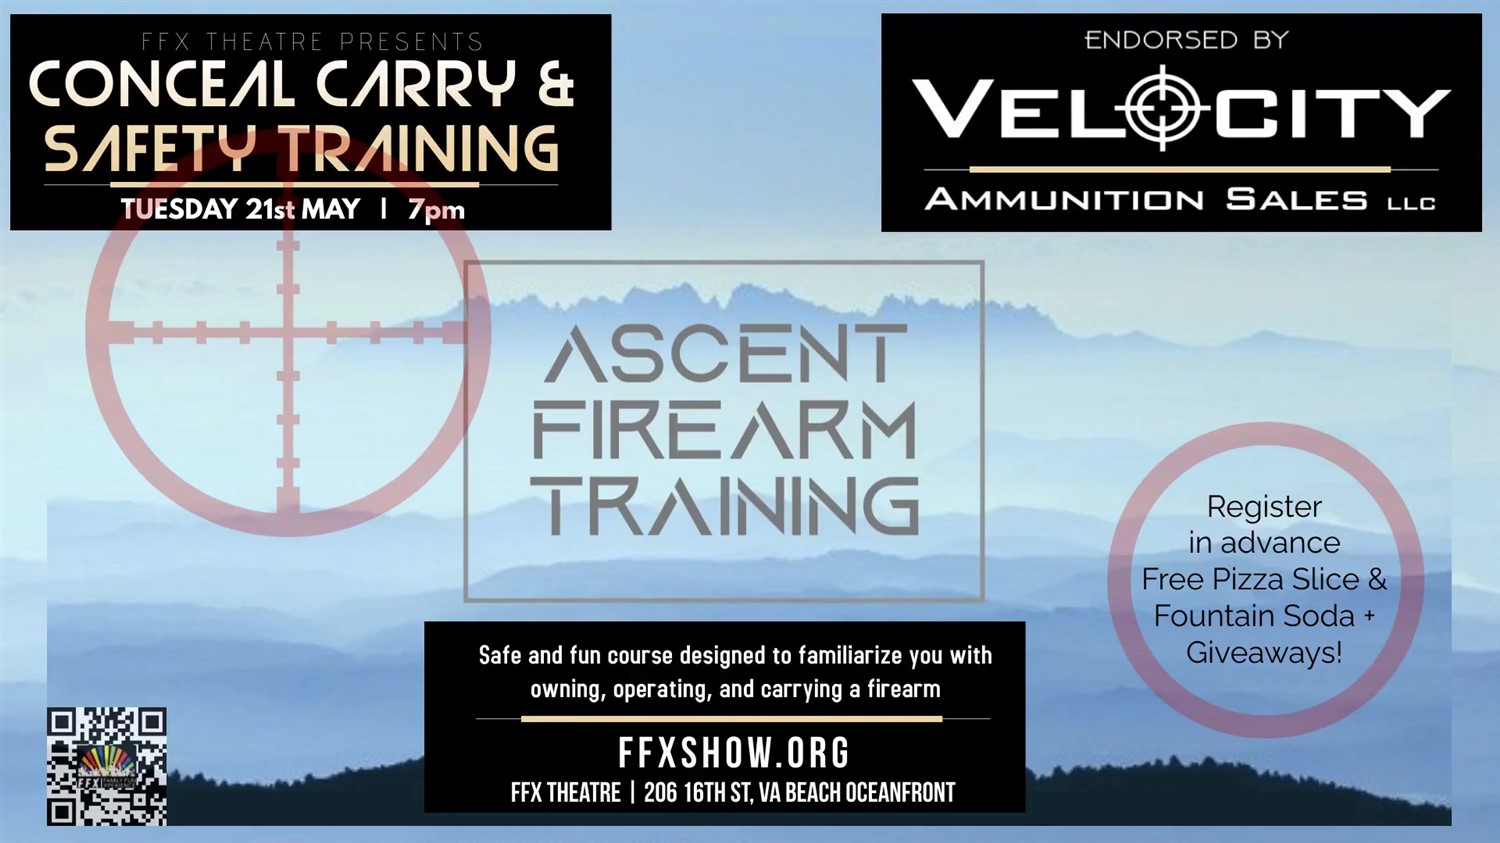 ASCENT FIREARM TRAINING Conceal Carry and/or Safety Class on mai 21, 19:00@FFX Theatre - Achetez des billets et obtenez des informations surFamily Fun Xperience tickets.ffxshow.org